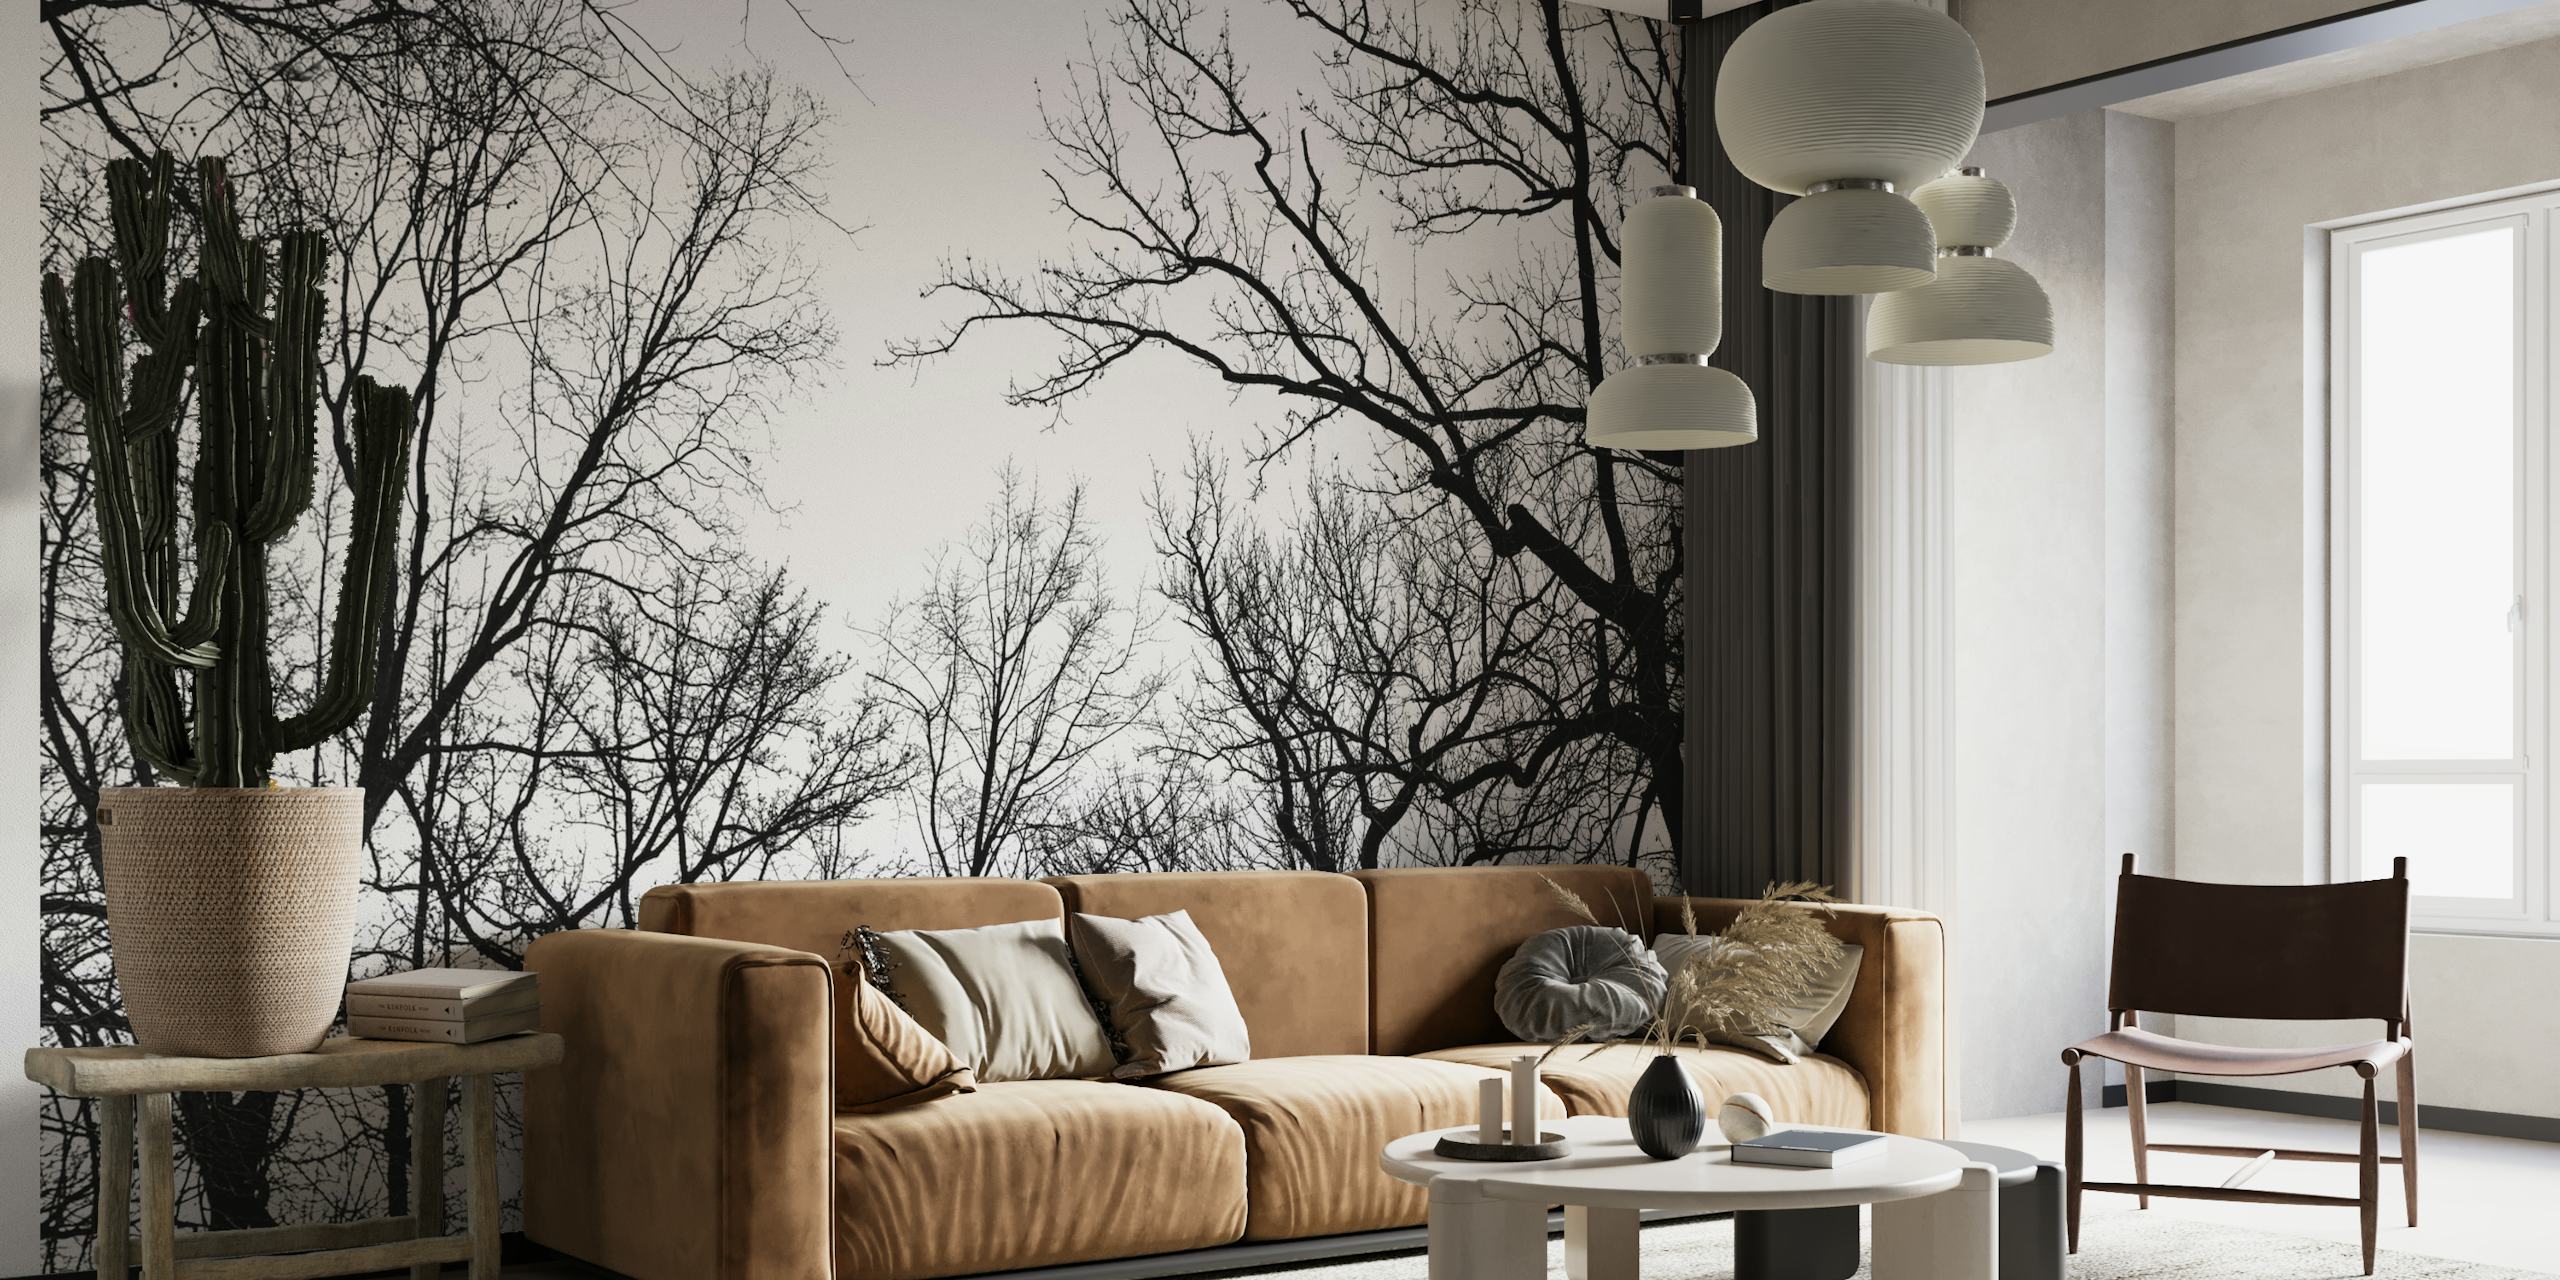 Black and white wall mural of tree branches against an overcast sky